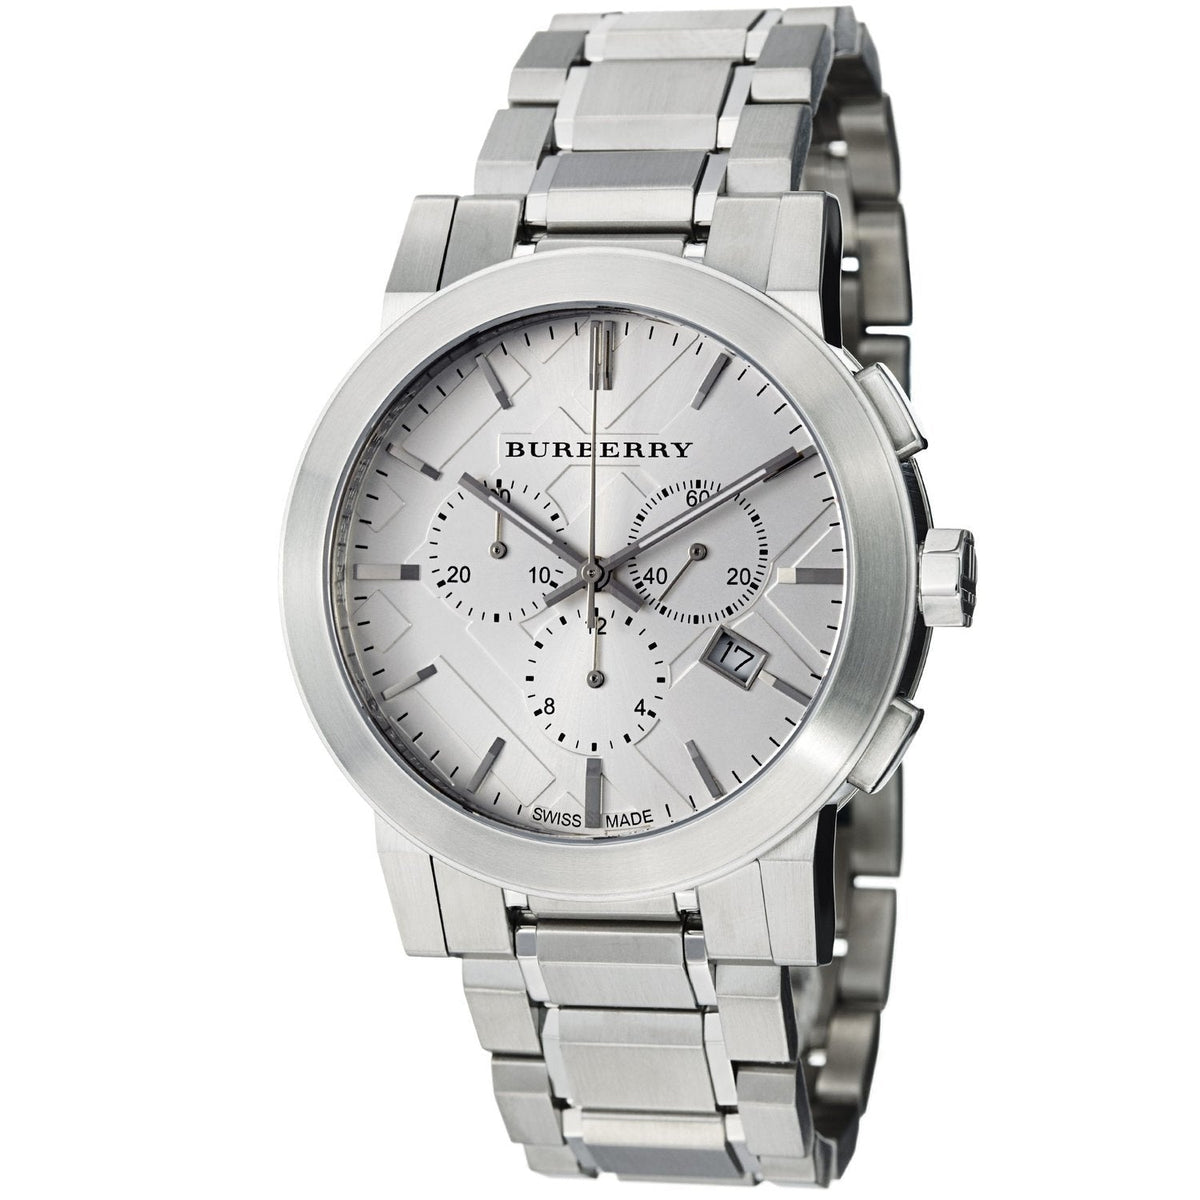 Burberry Men's Watch Chronograph The City Silver BU9350 RealWatch™